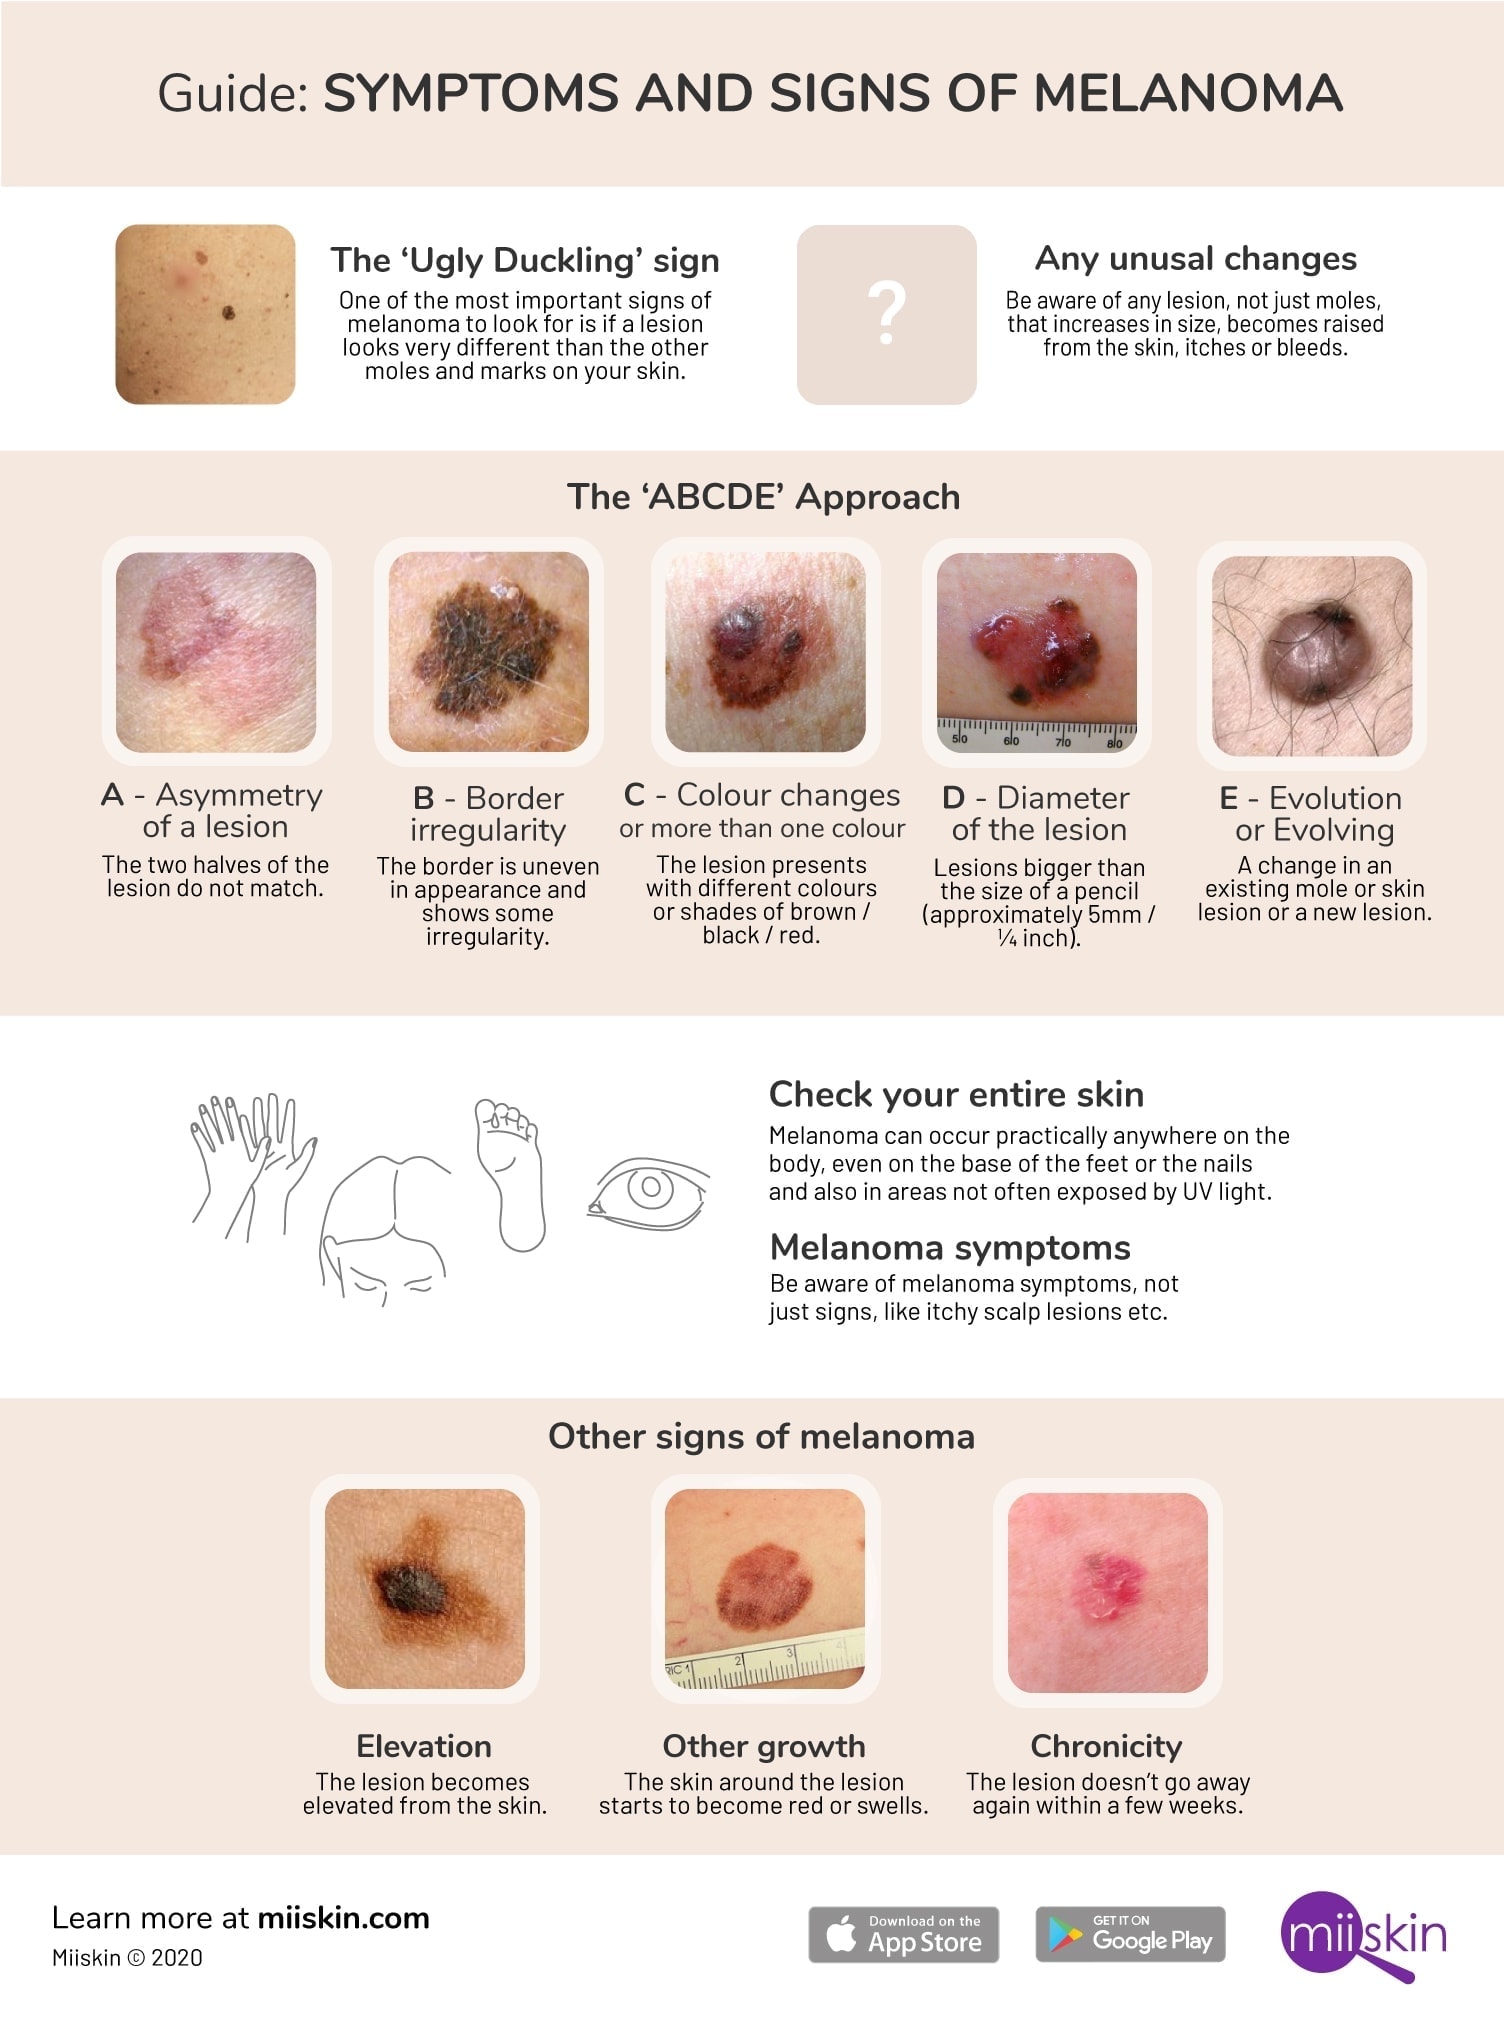 early melanoma symptoms and signs